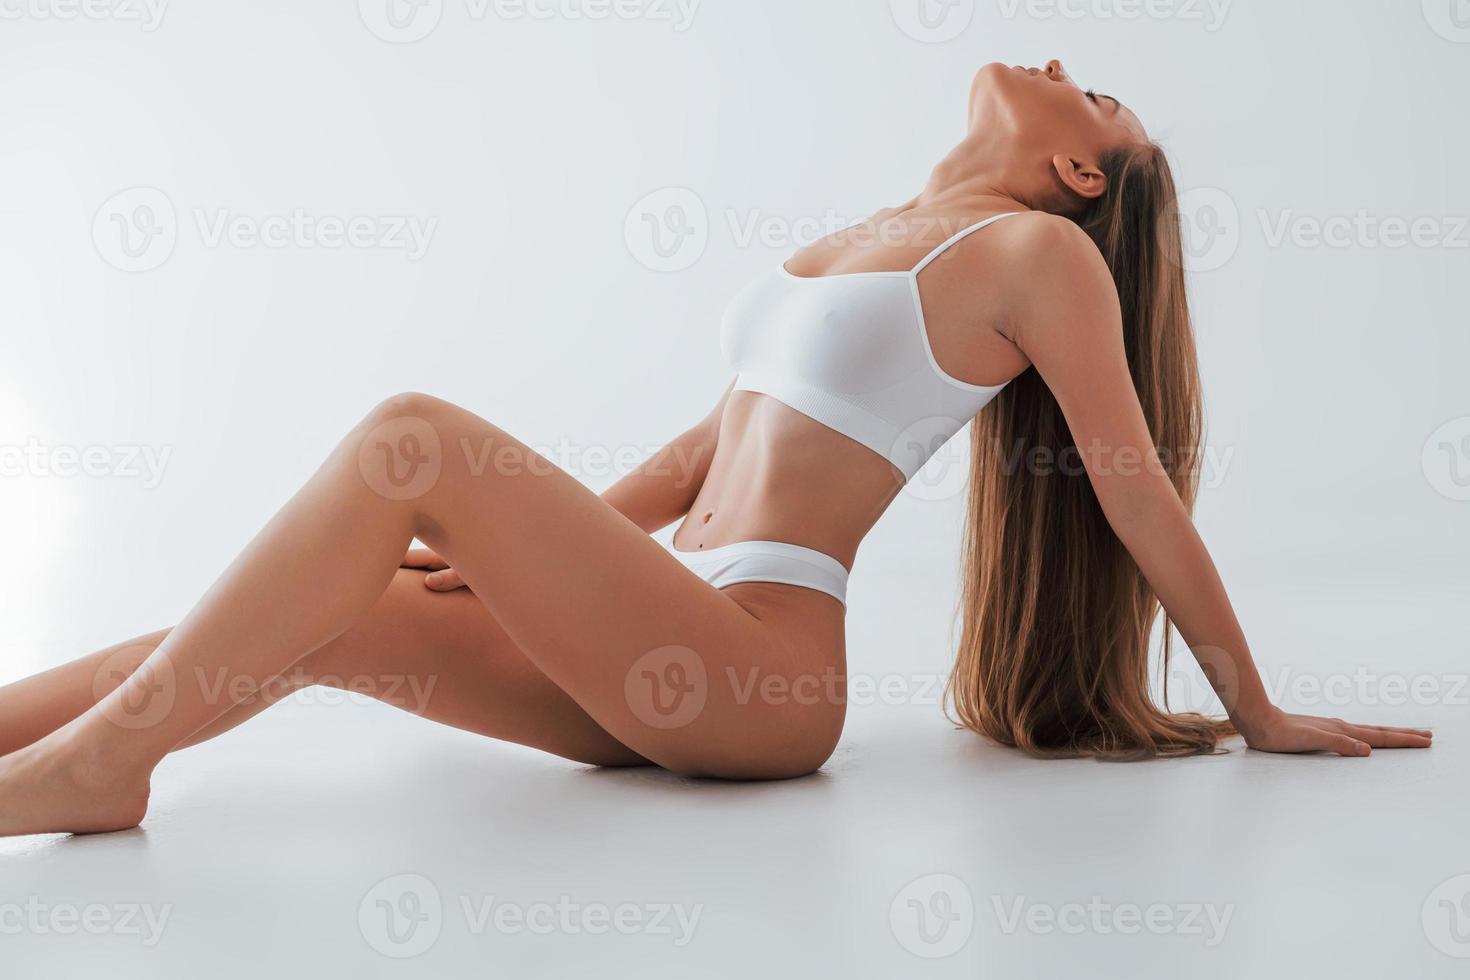 White lingerie. Woman in underwear with slim body type is posing in the studio photo